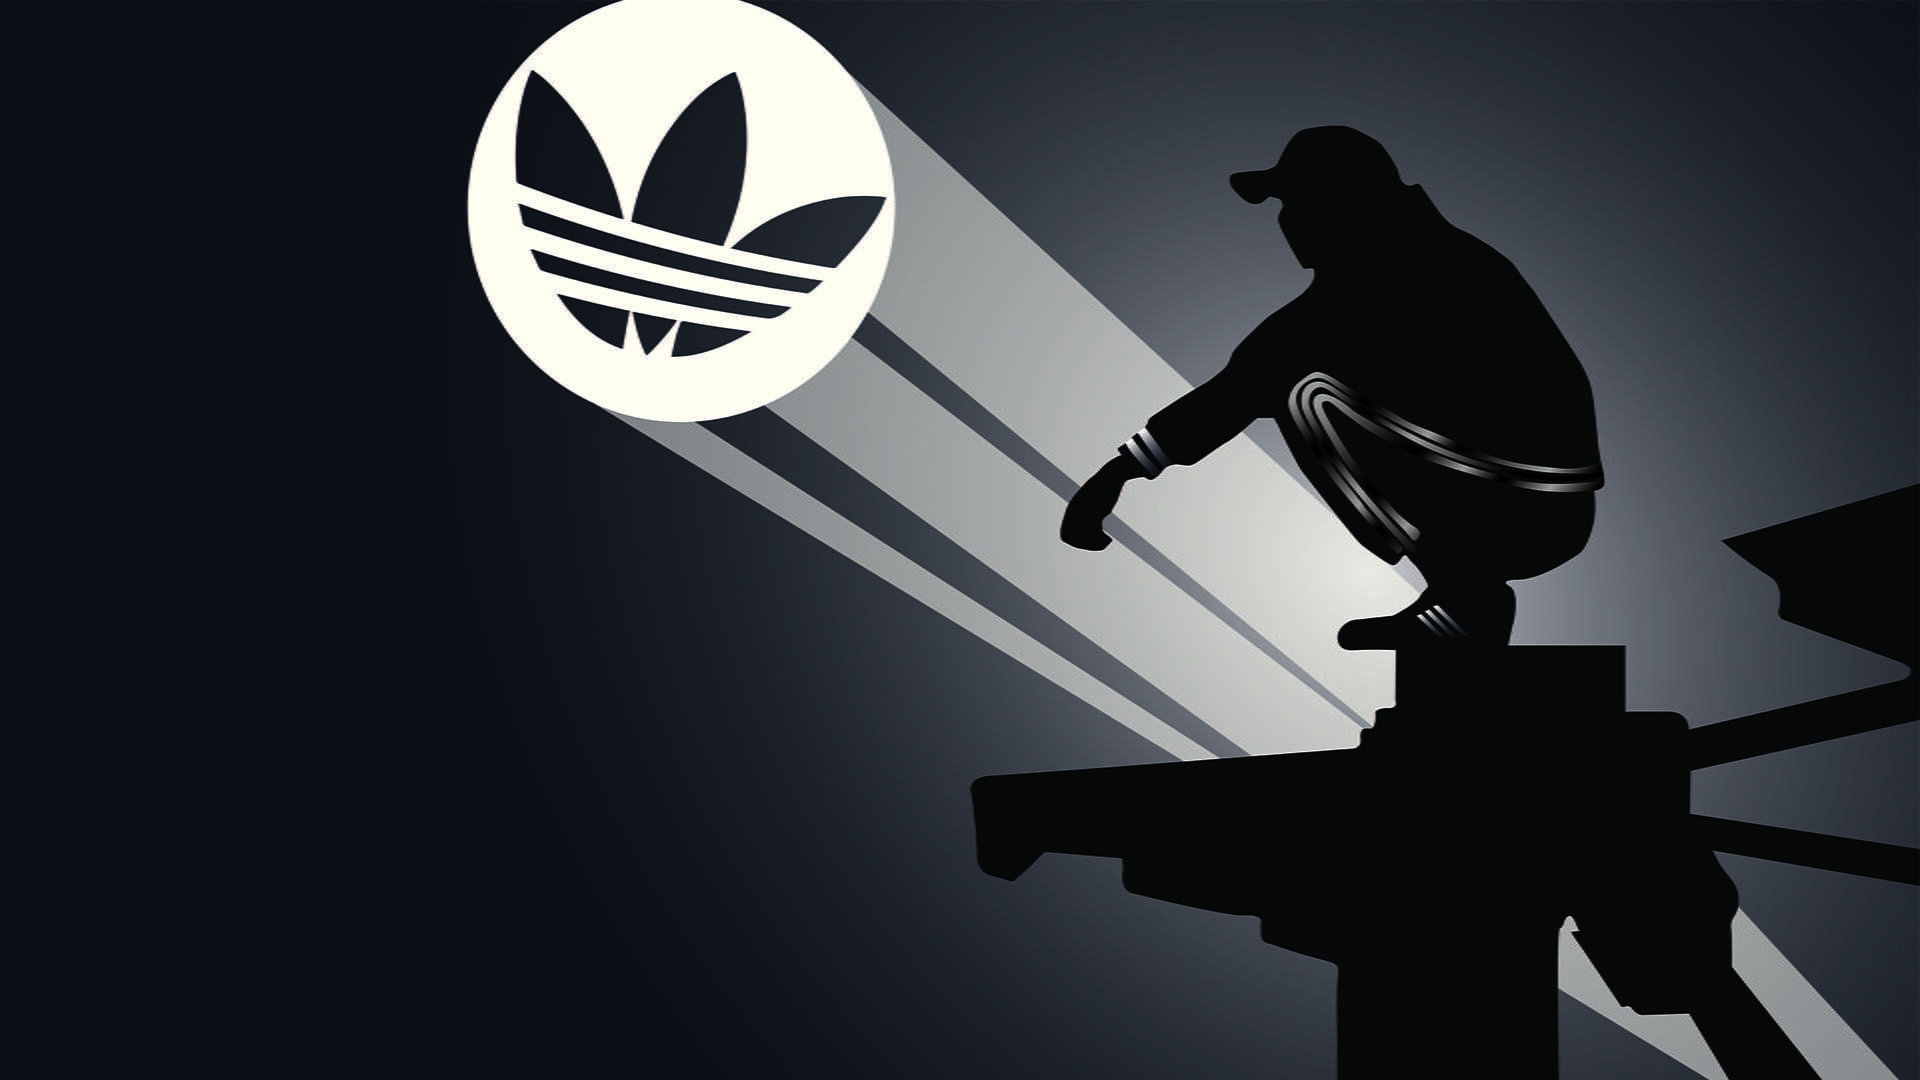 Adidas Wallpapers: Top Best 65 Adidas Backgrounds Download